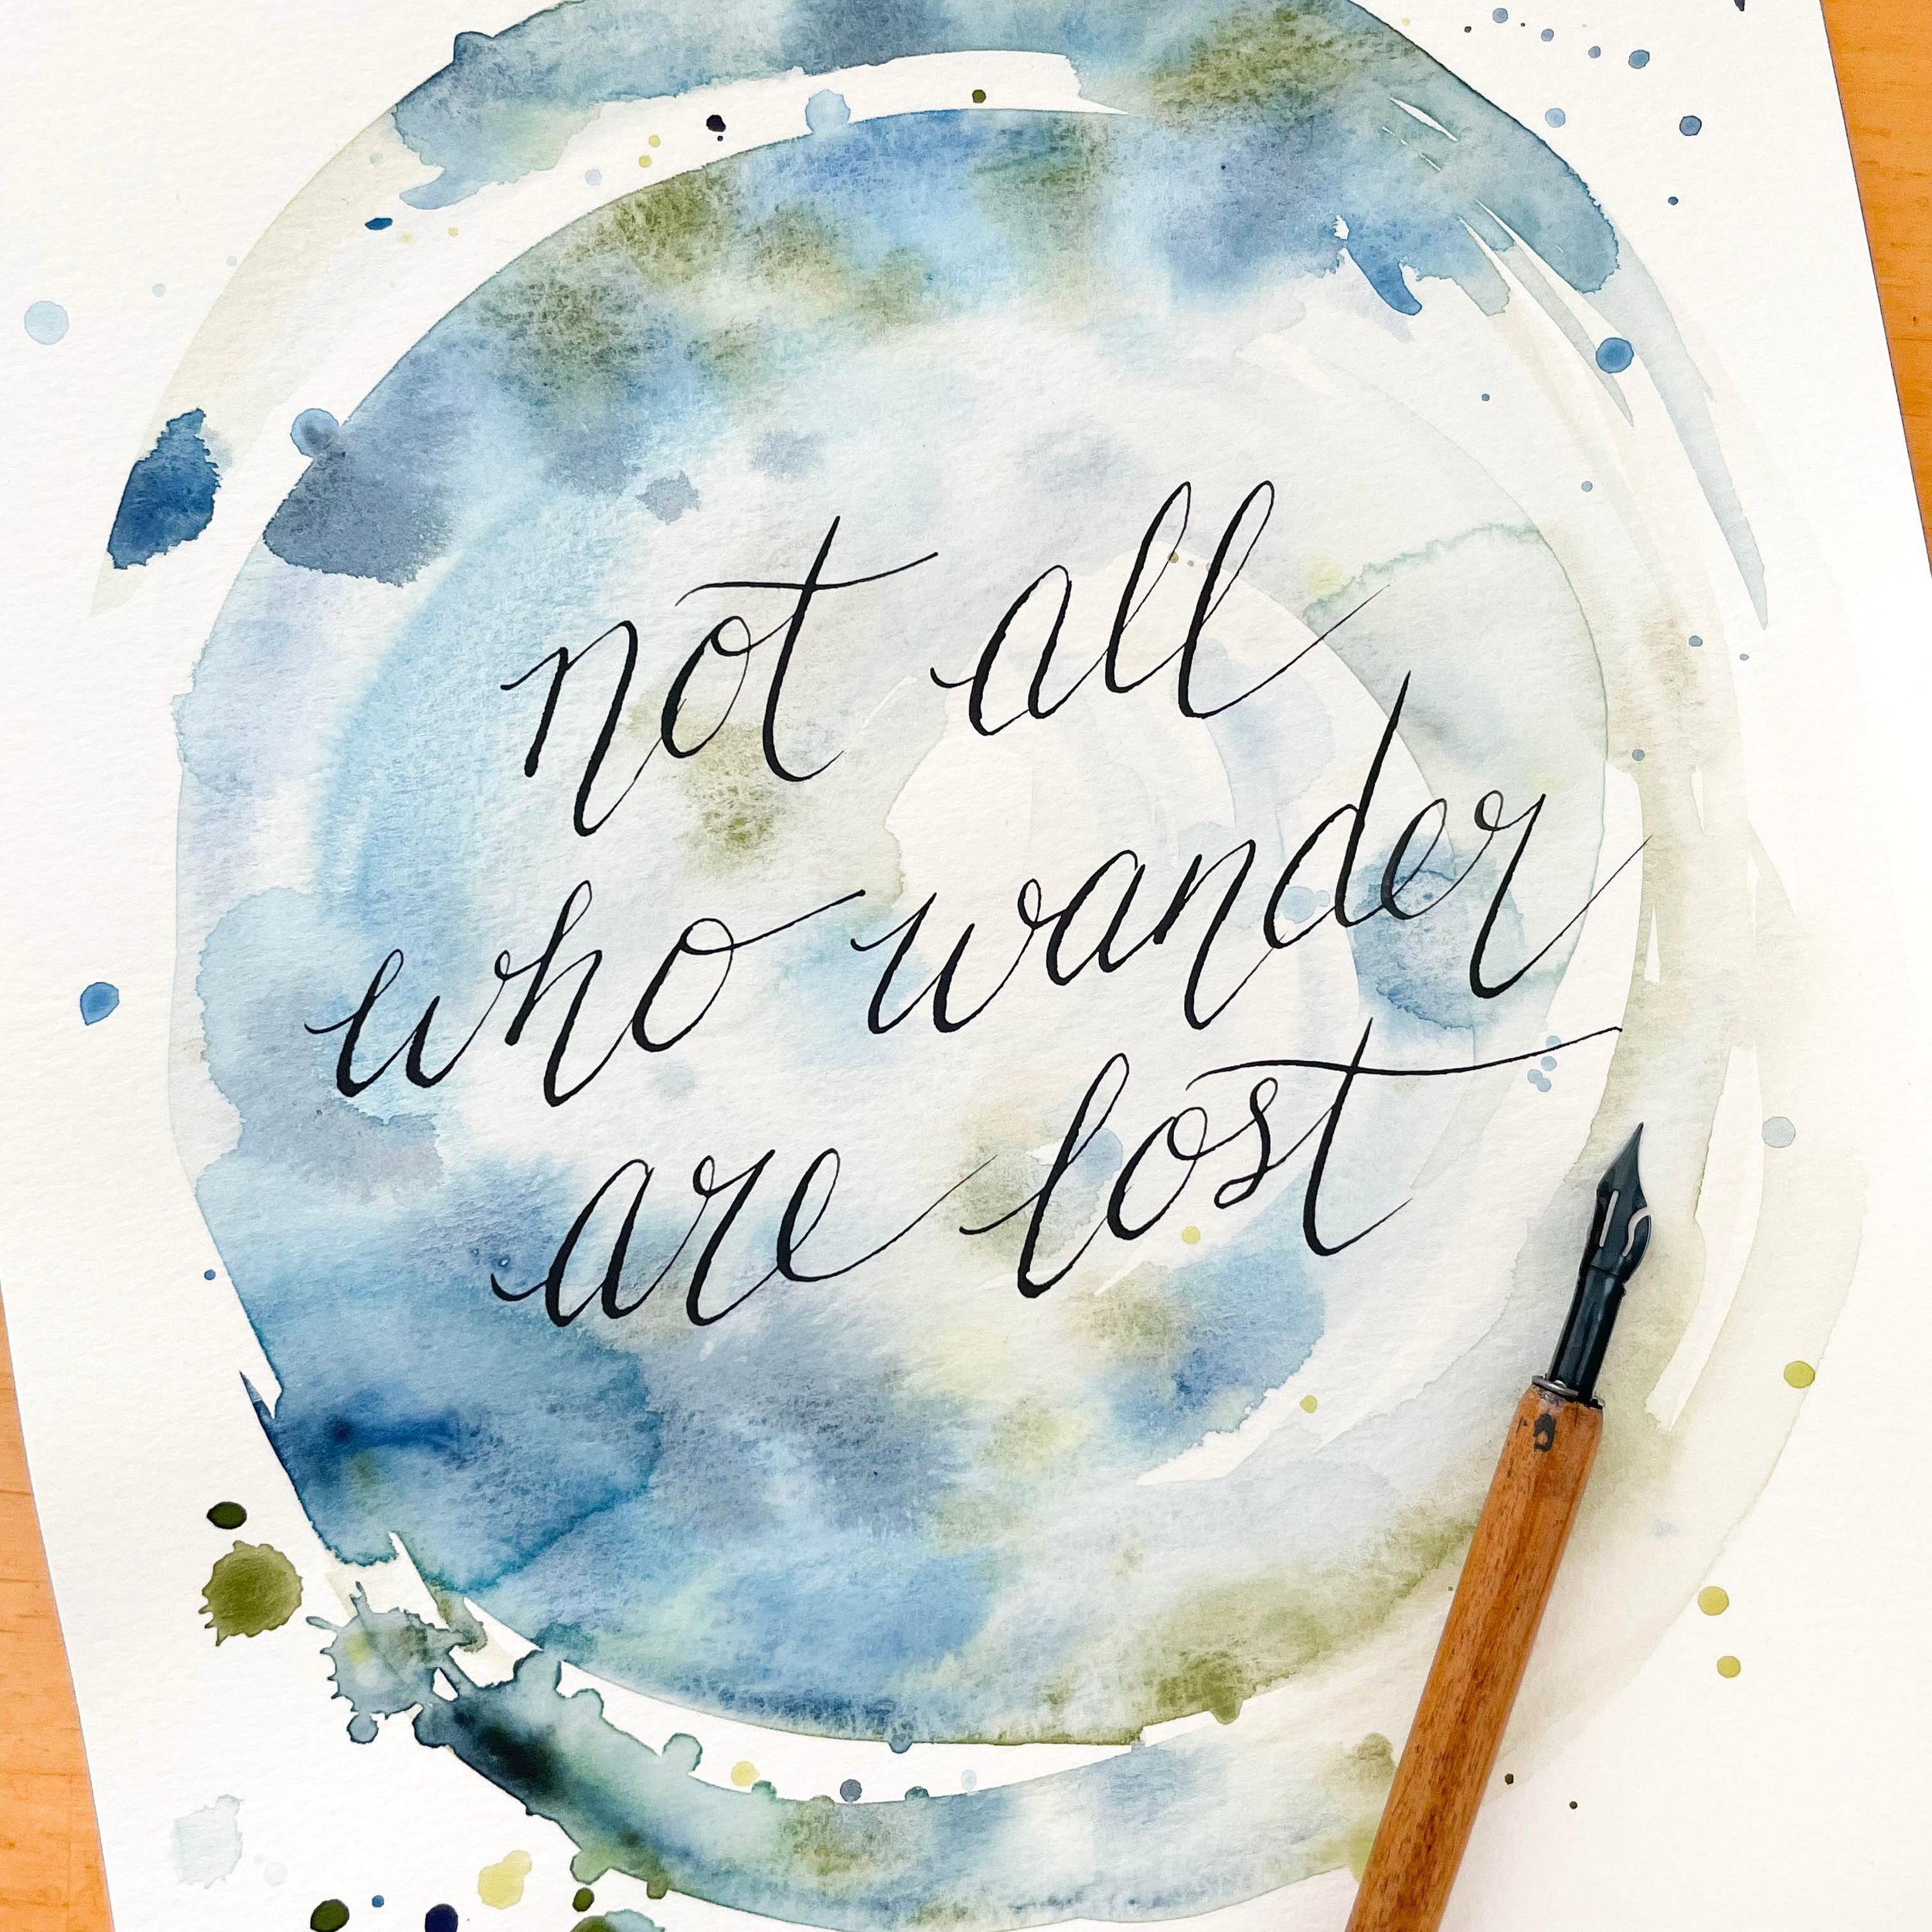 A custom calligraphy quote with painterly watercolor washes of indigo blue and evergreen shades melding together for the background 🖋️🎨